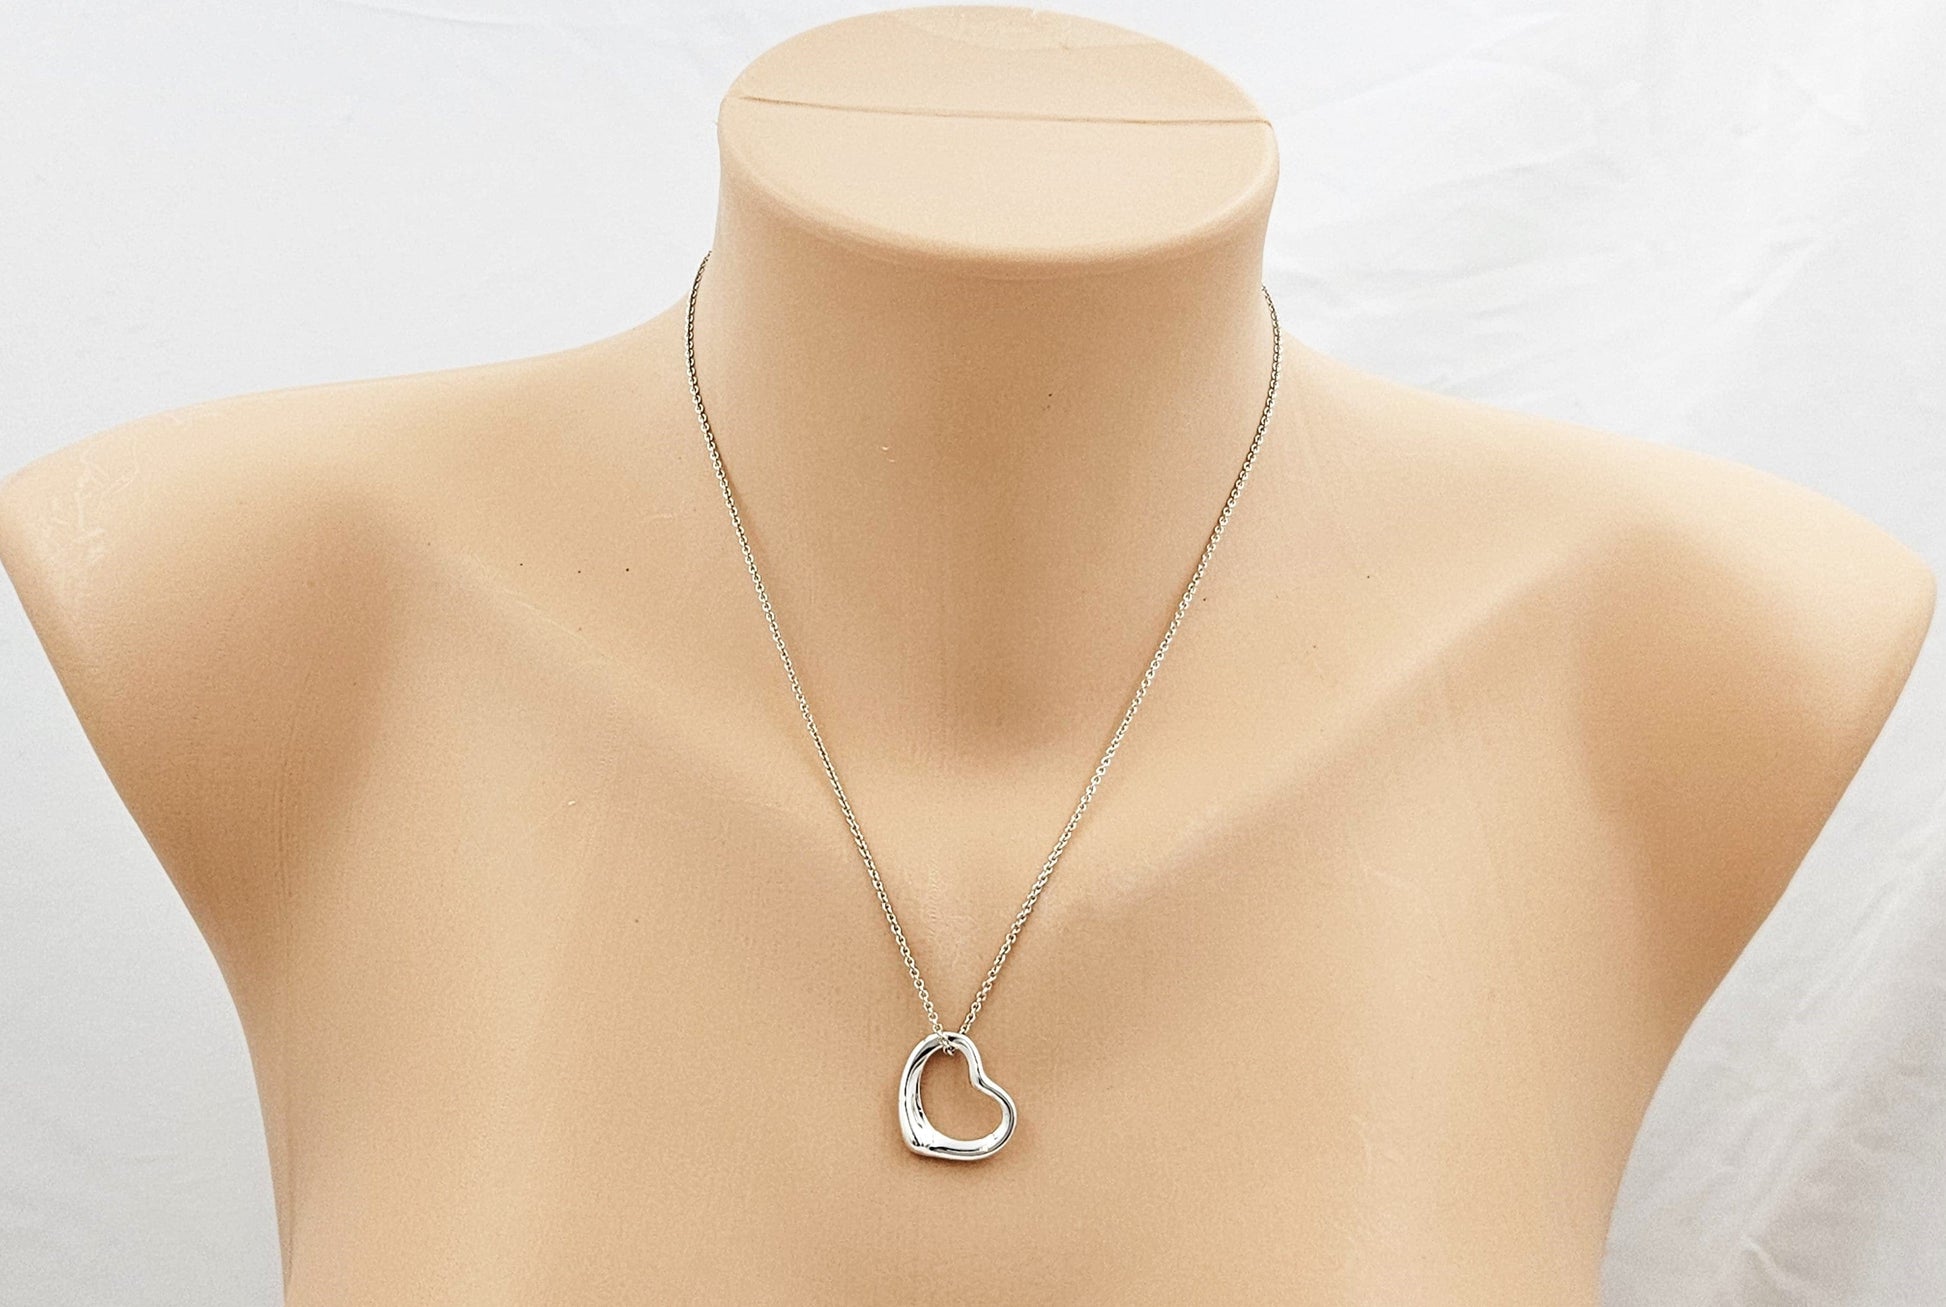 Tiffany & Co. Jewelry Superb Tiffany&Co Elsa P Solid Sterling Silver Heart Pendant Necklace